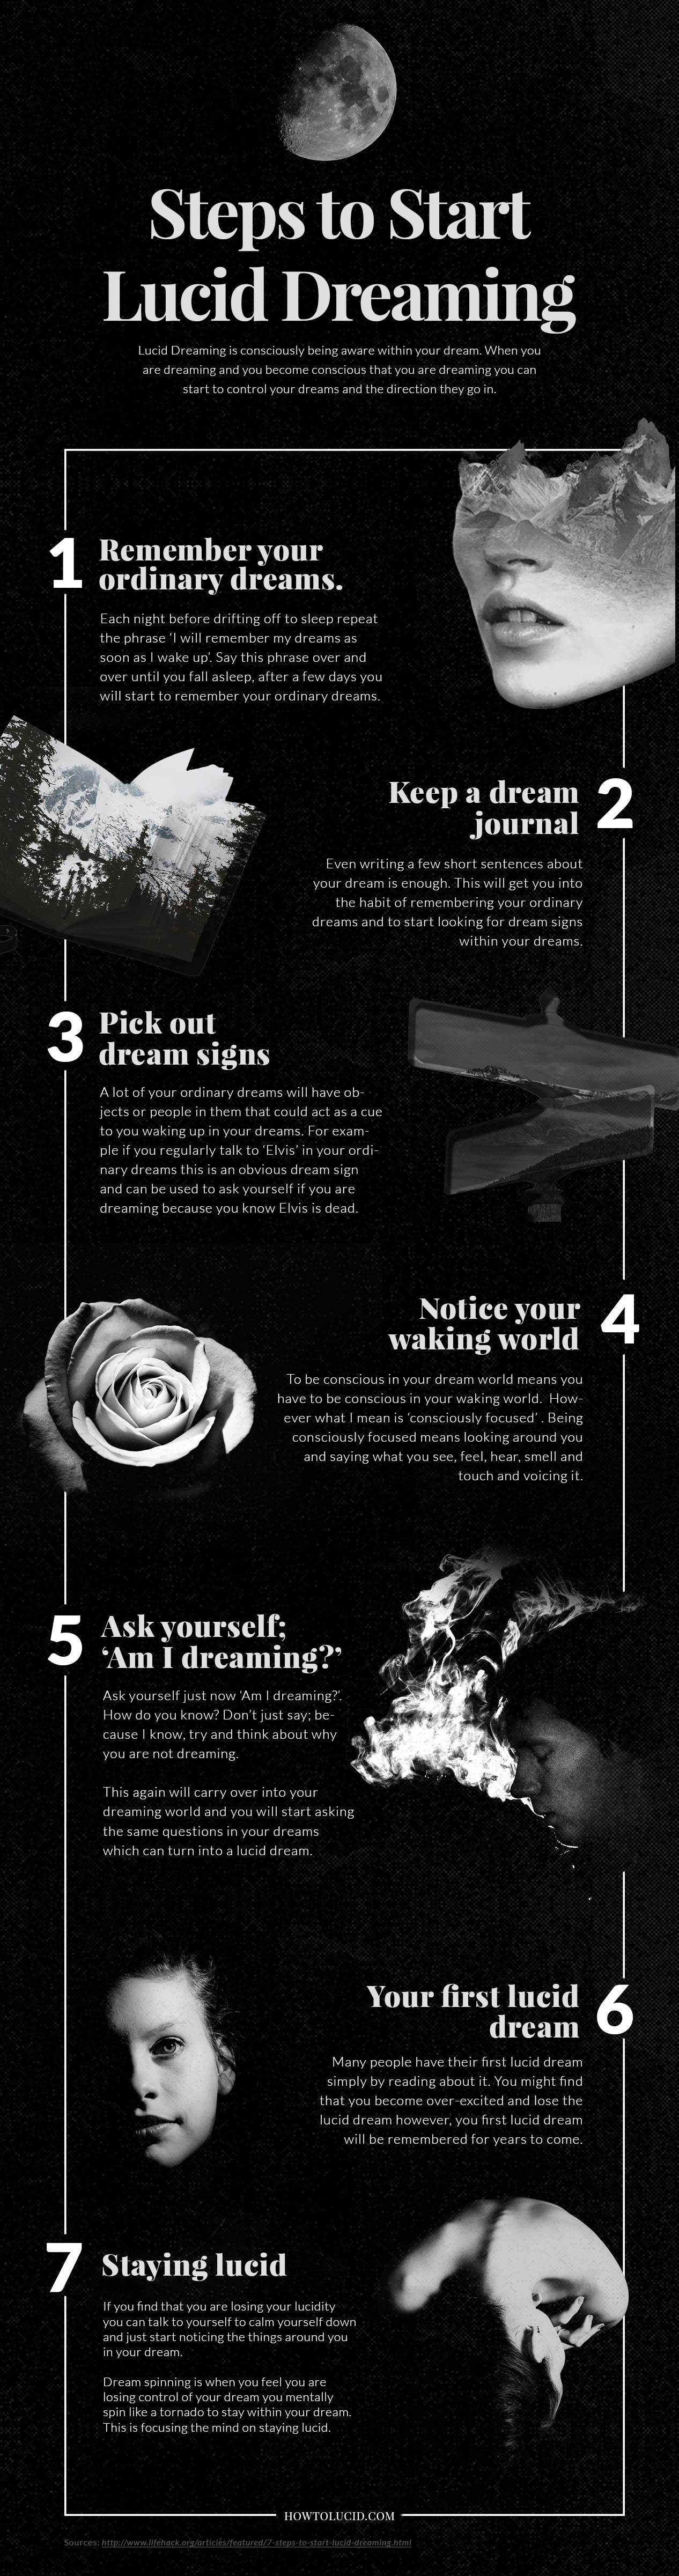 How to Control your Dreams with Lucid Dreaming